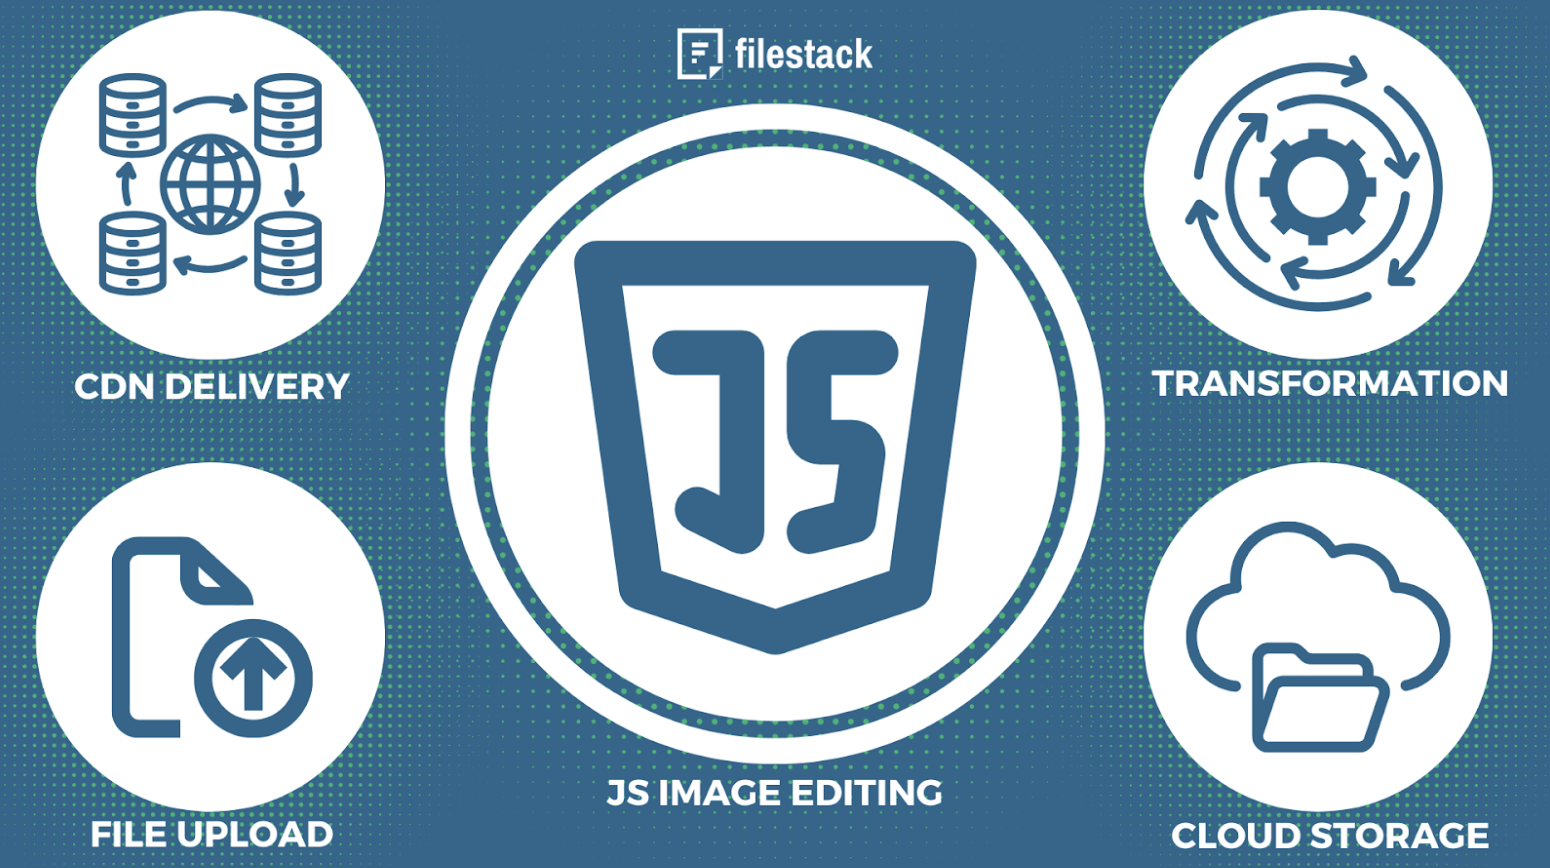 Introducing Filestack: An all-in-one solution for JavaScript image uploading, manipulation, and management